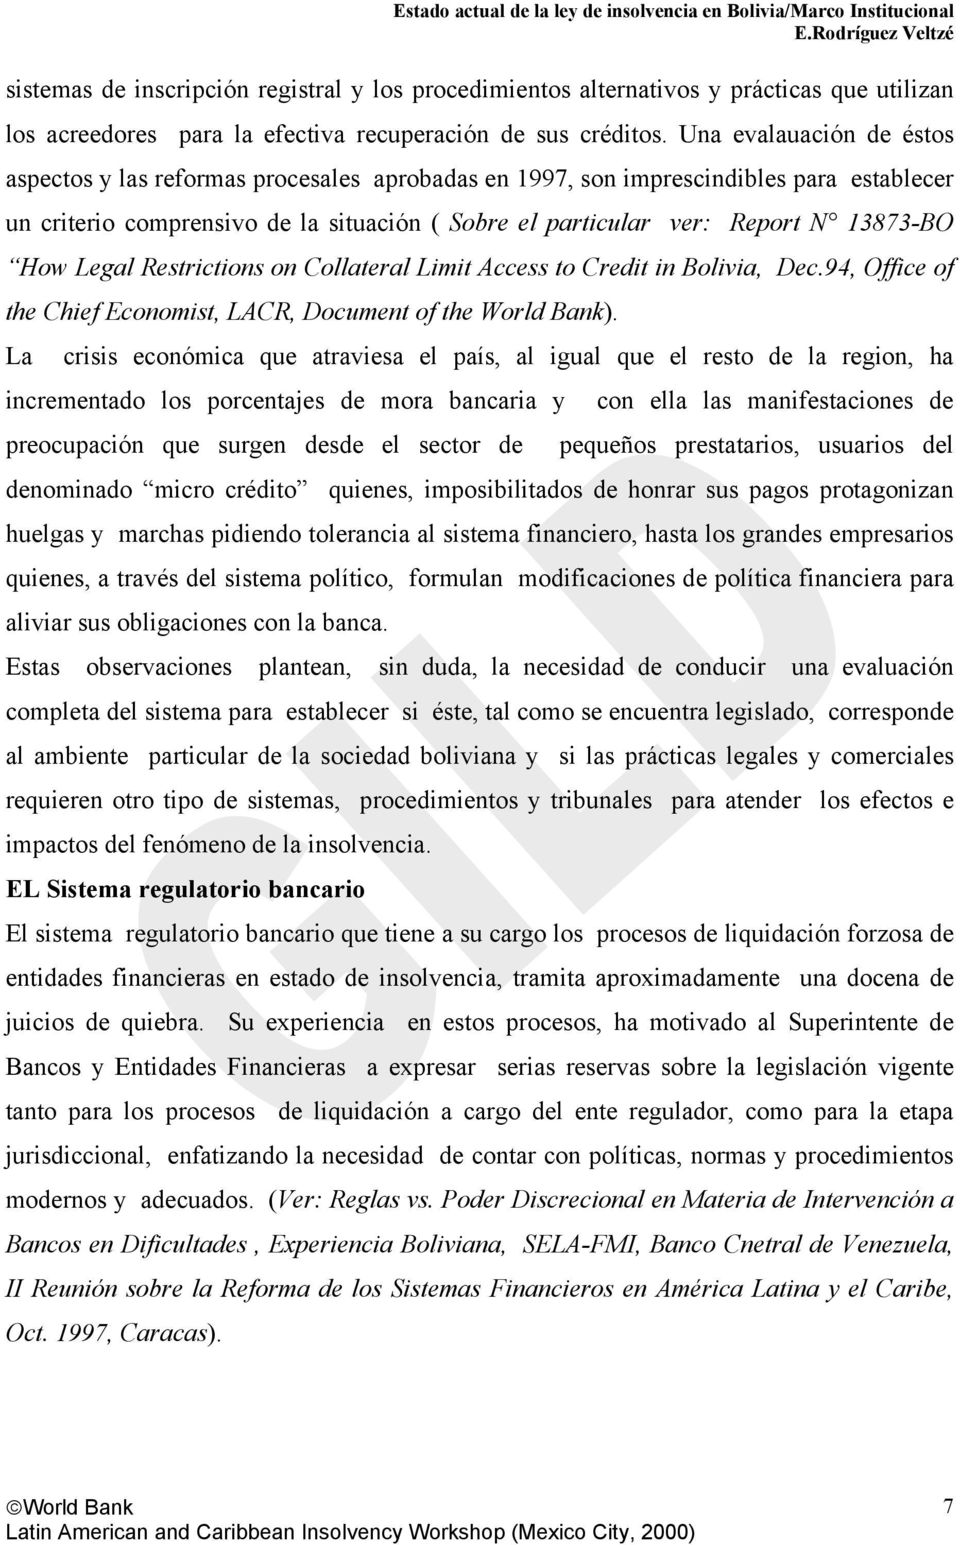 How Legal Restrictions on Collateral Limit Access to Credit in Bolivia, Dec.94, Office of the Chief Economist, LACR, Document of the World Bank).